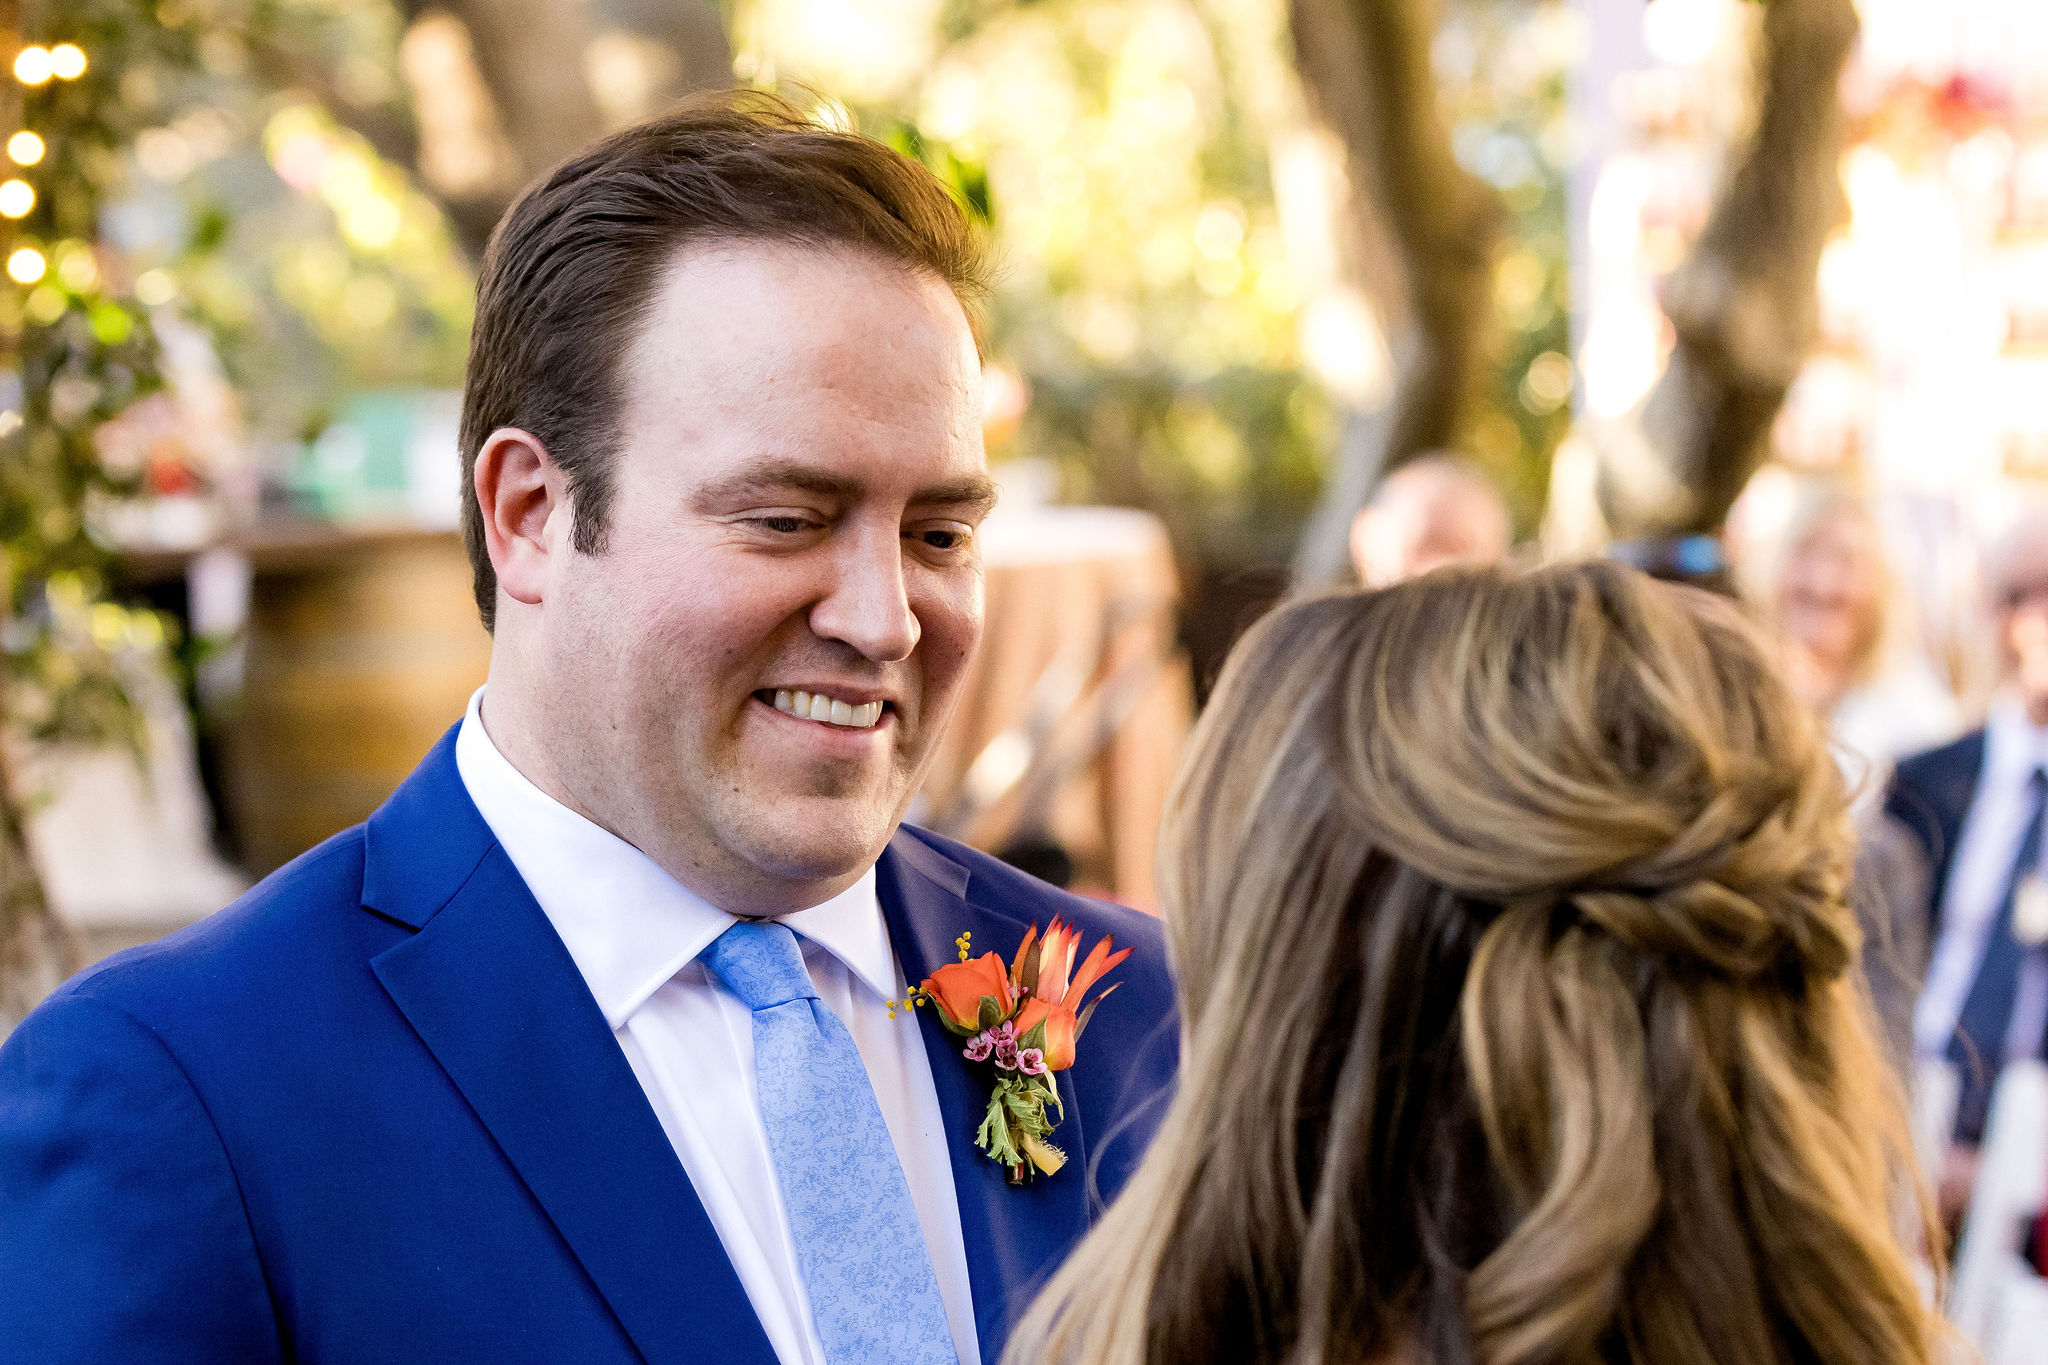 groom in blue suit and tie and bright orange boutonniere smiles at bride during wedding ceremony